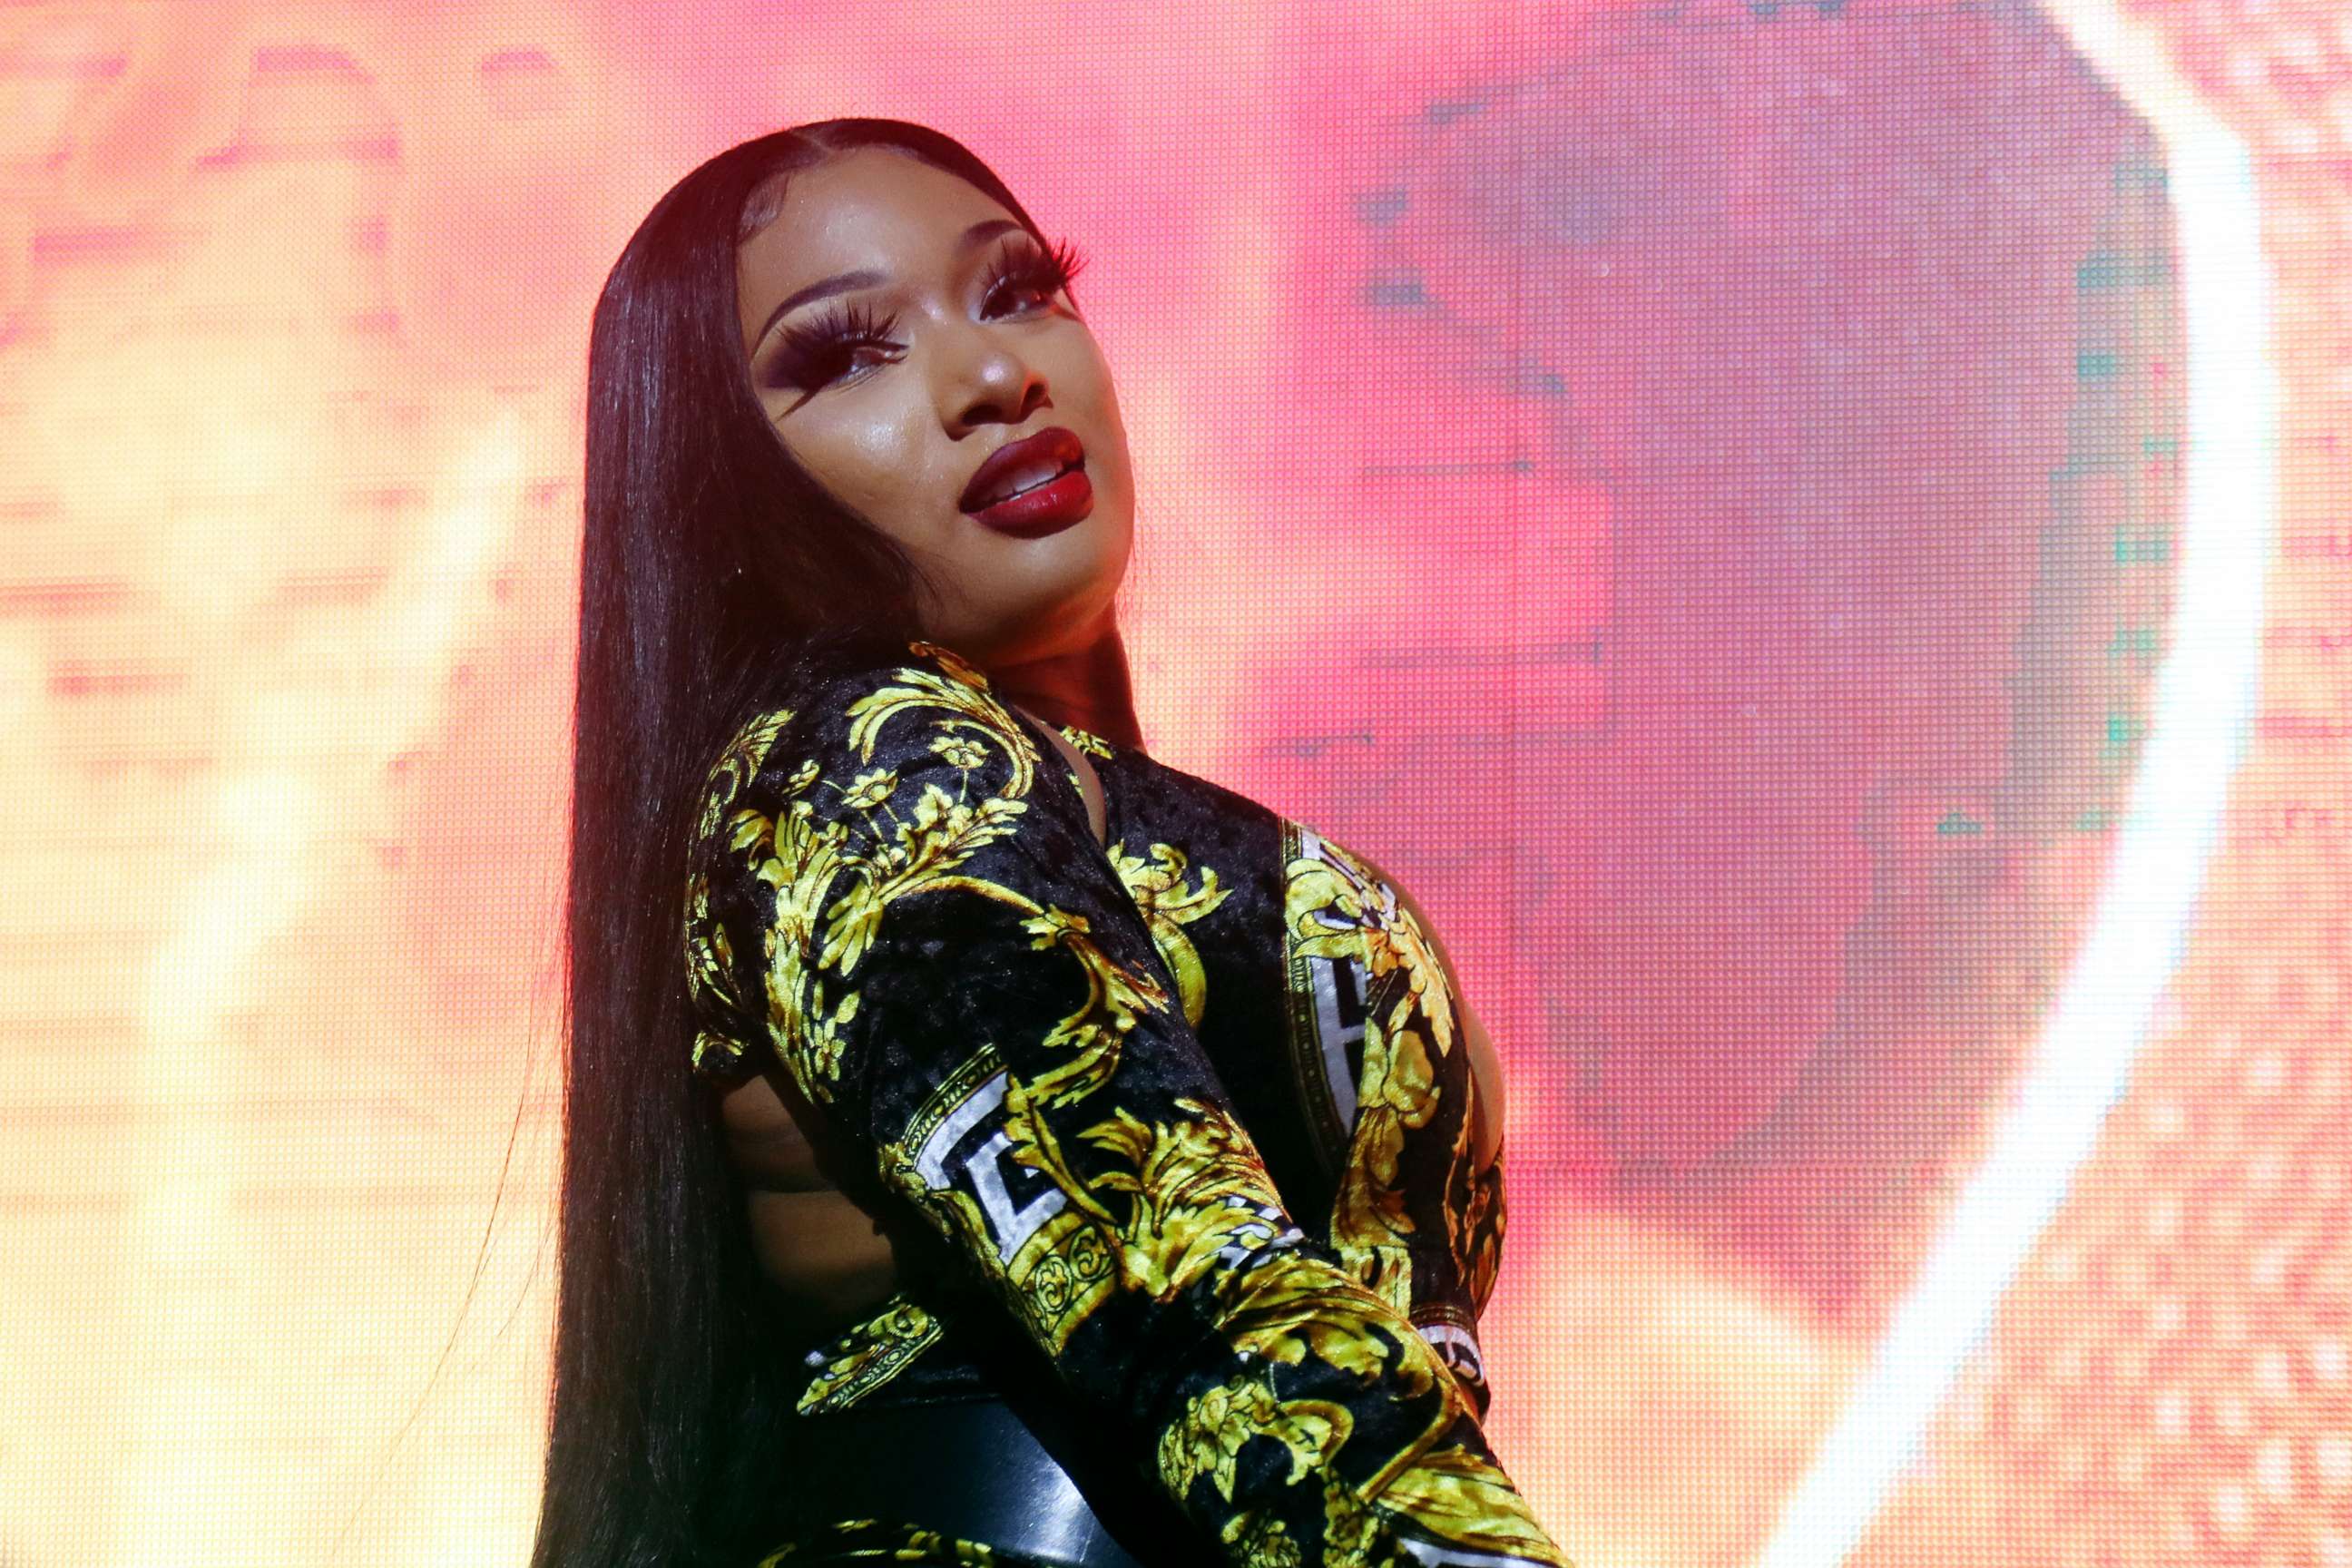 PHOTO: Megan Thee Stallion performs onstage at the 2020 MAXIM Big Game Experience, Feb. 1, 2020, in Miami, Florida.